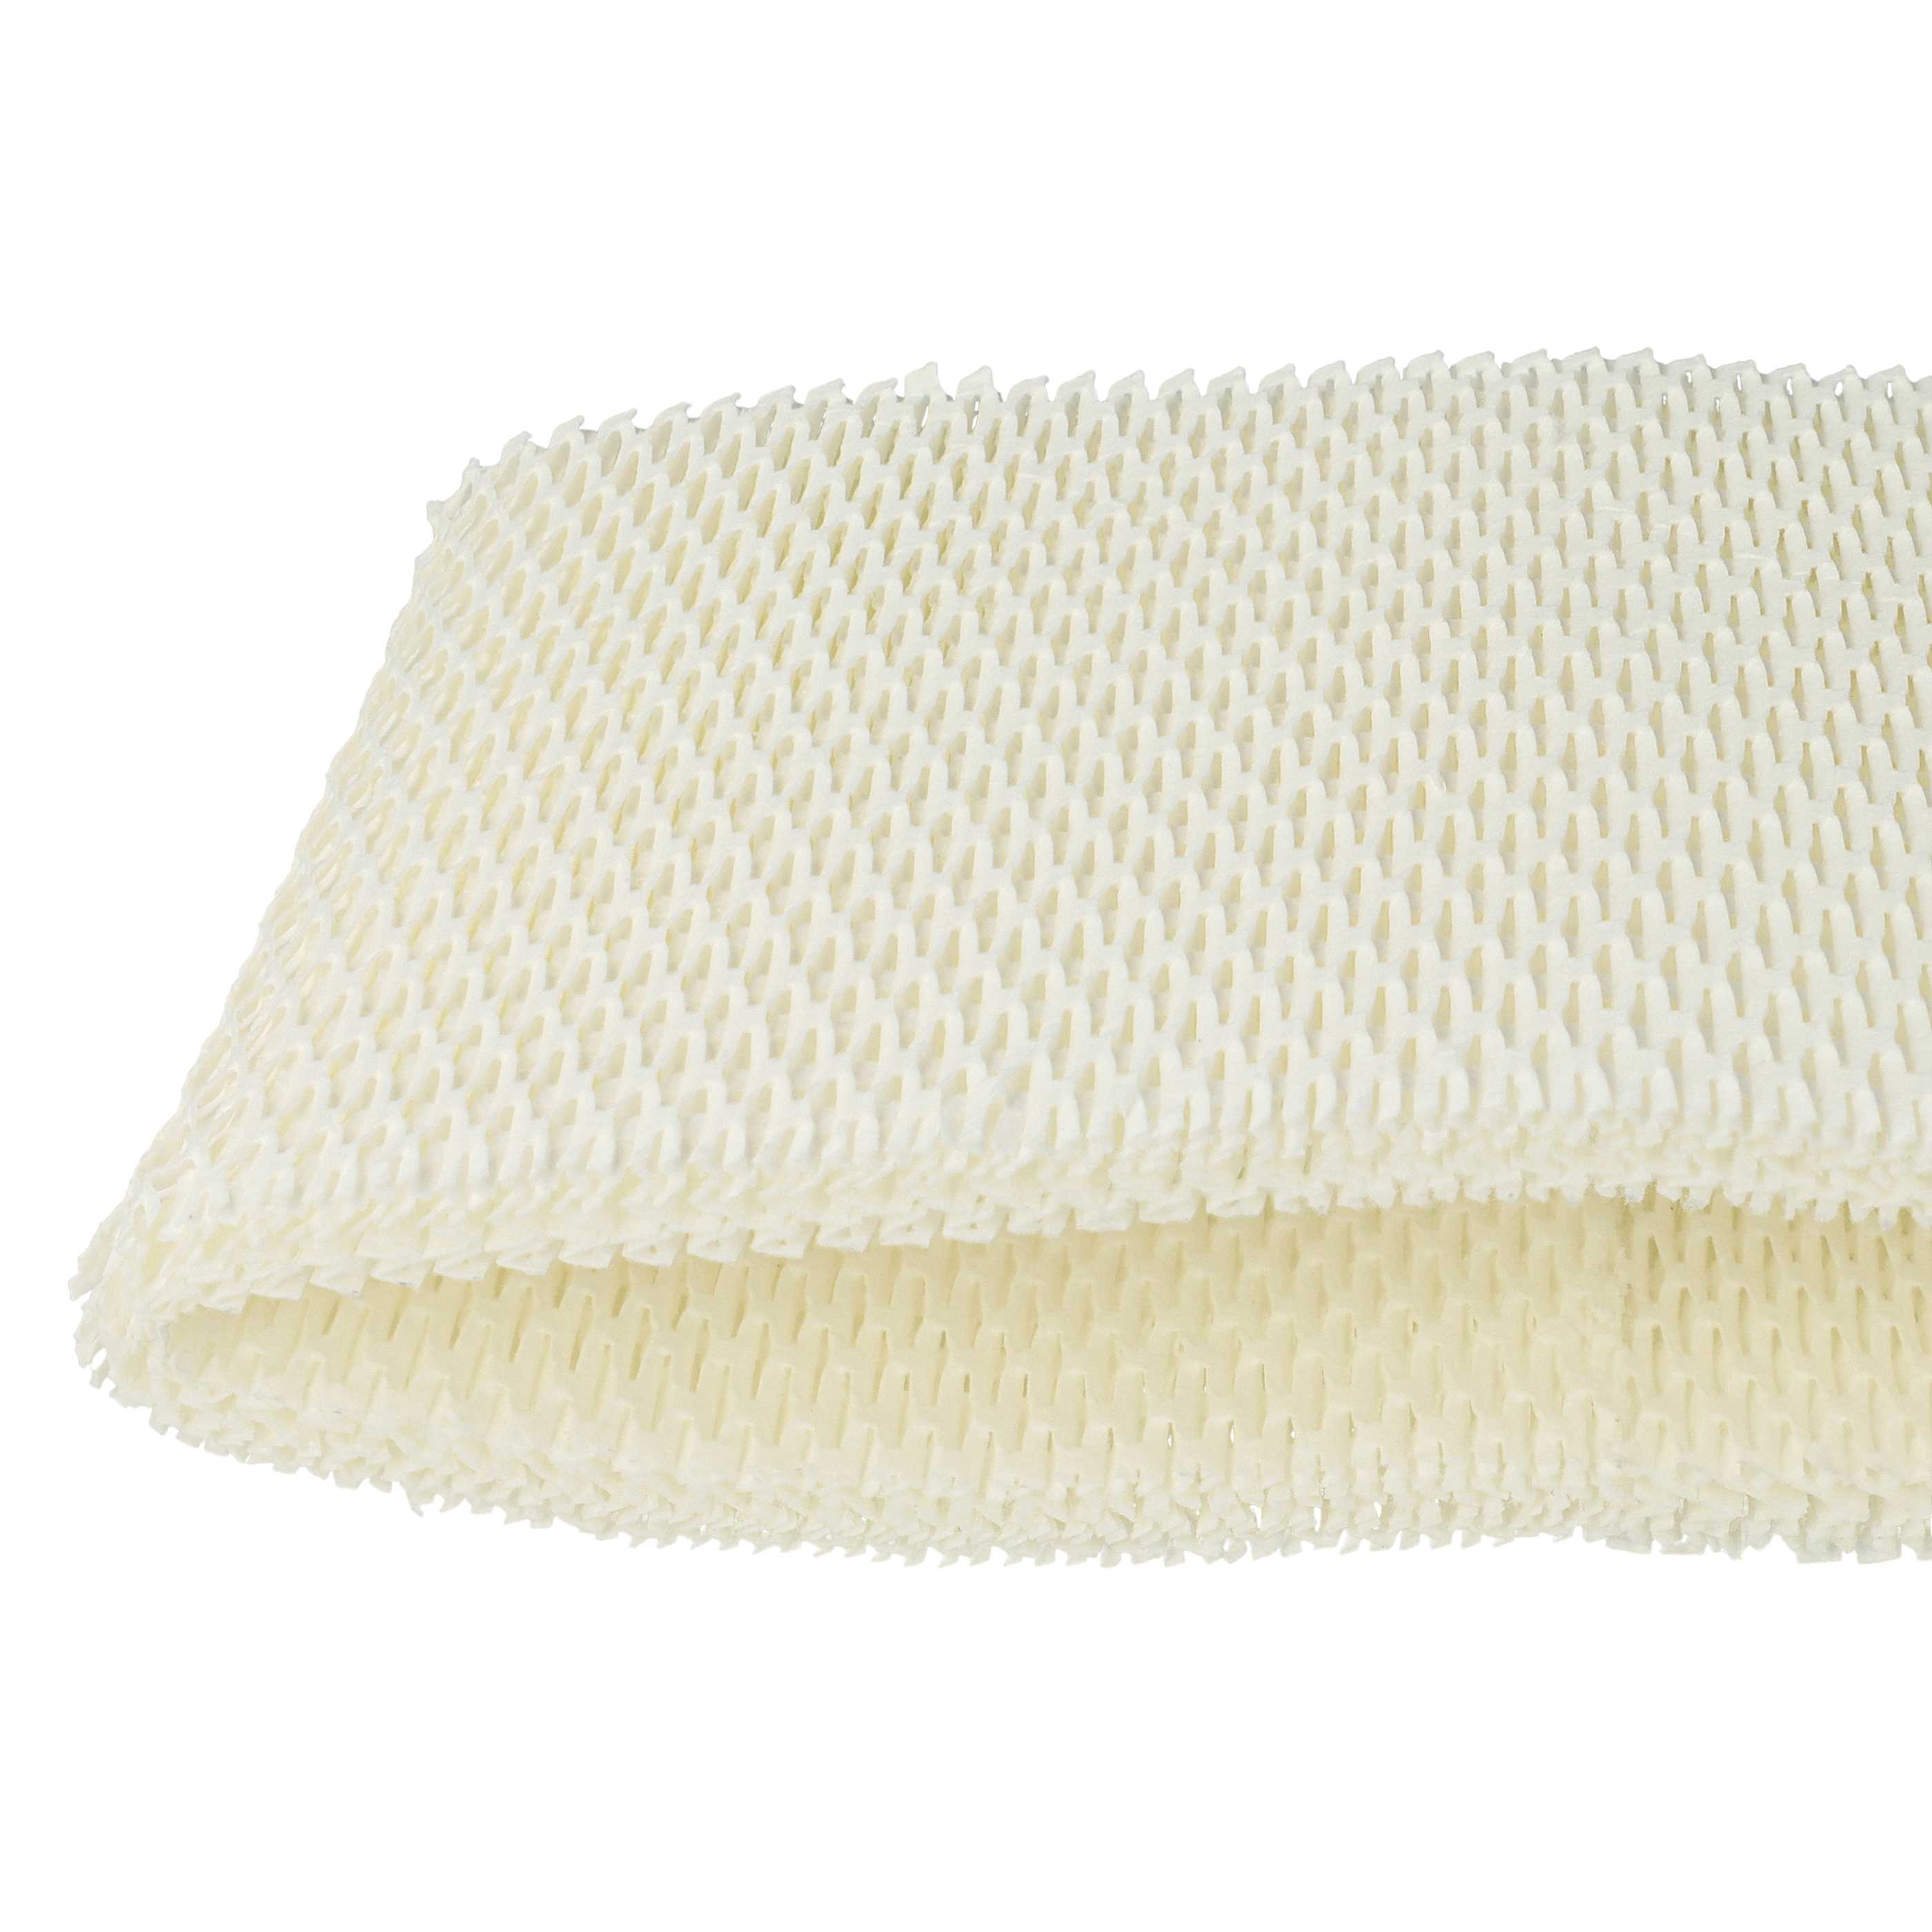 vhbw Wicking Humidifier Filter Replacement for Boneco A7018 for Air Humidifier - Air Filter